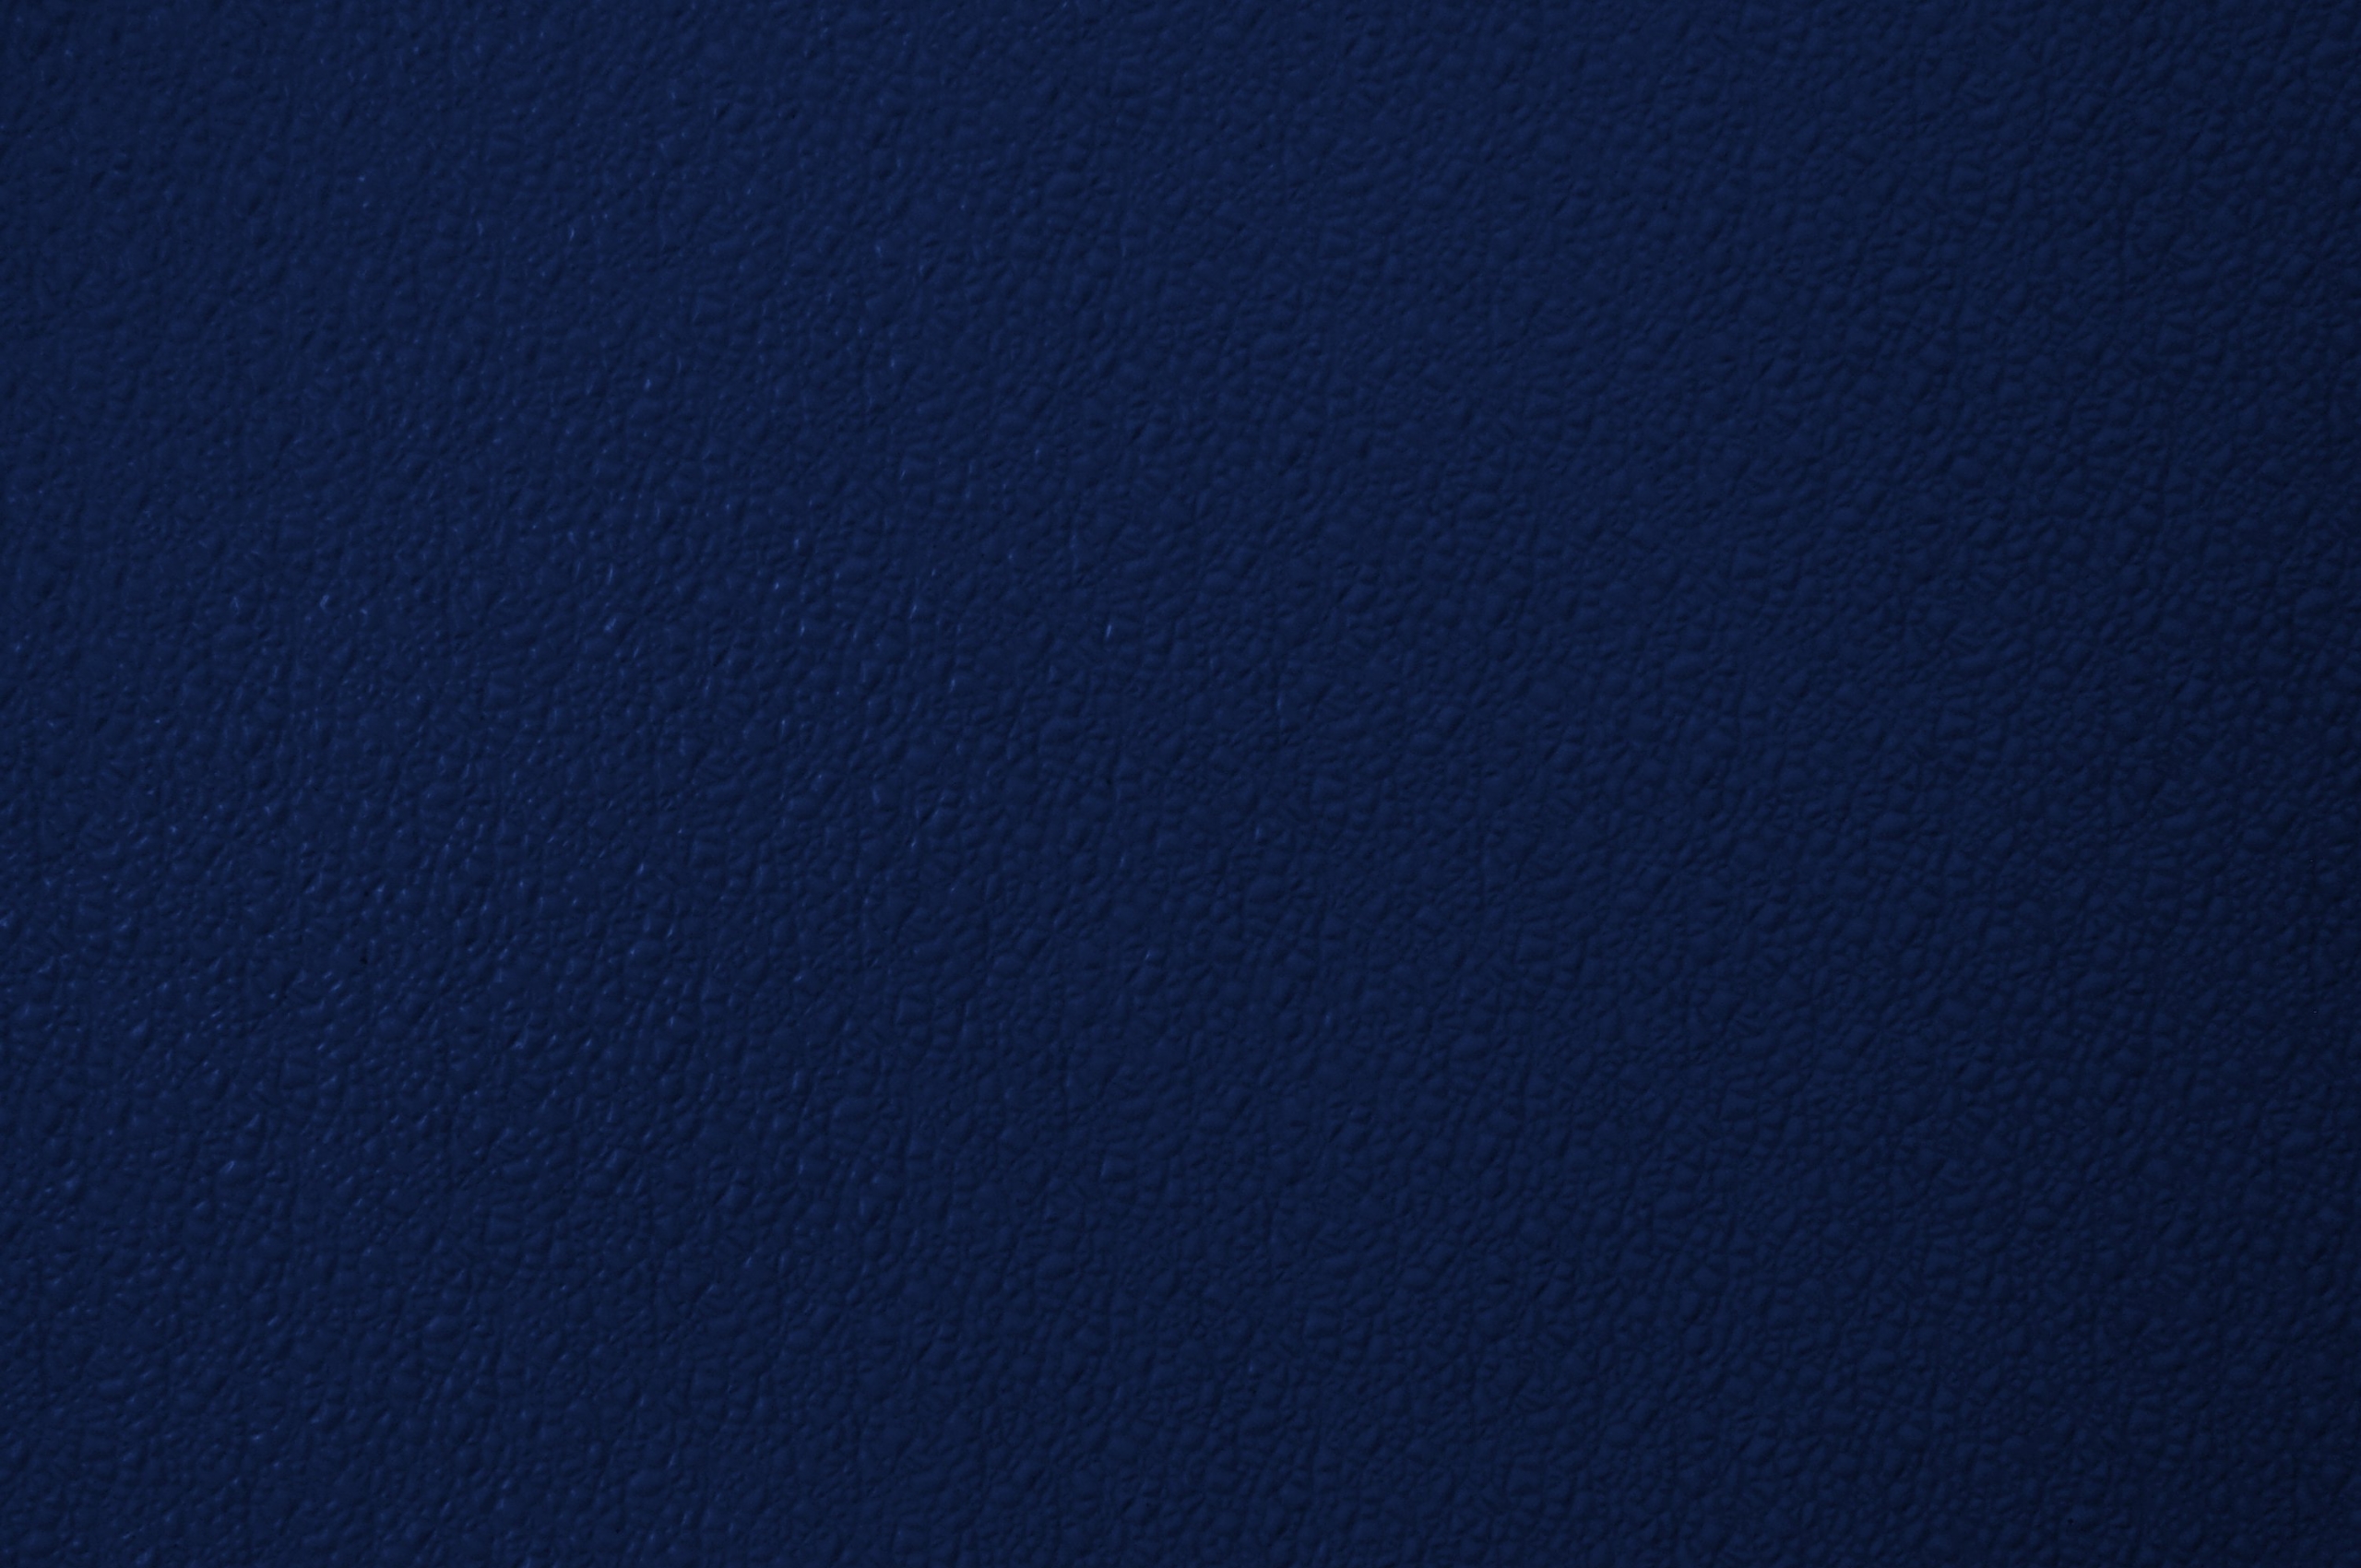 Bumpy Navy Blue Plastic Texture Picture Photograph Blue Wall Texture Wallpaper & Background Download